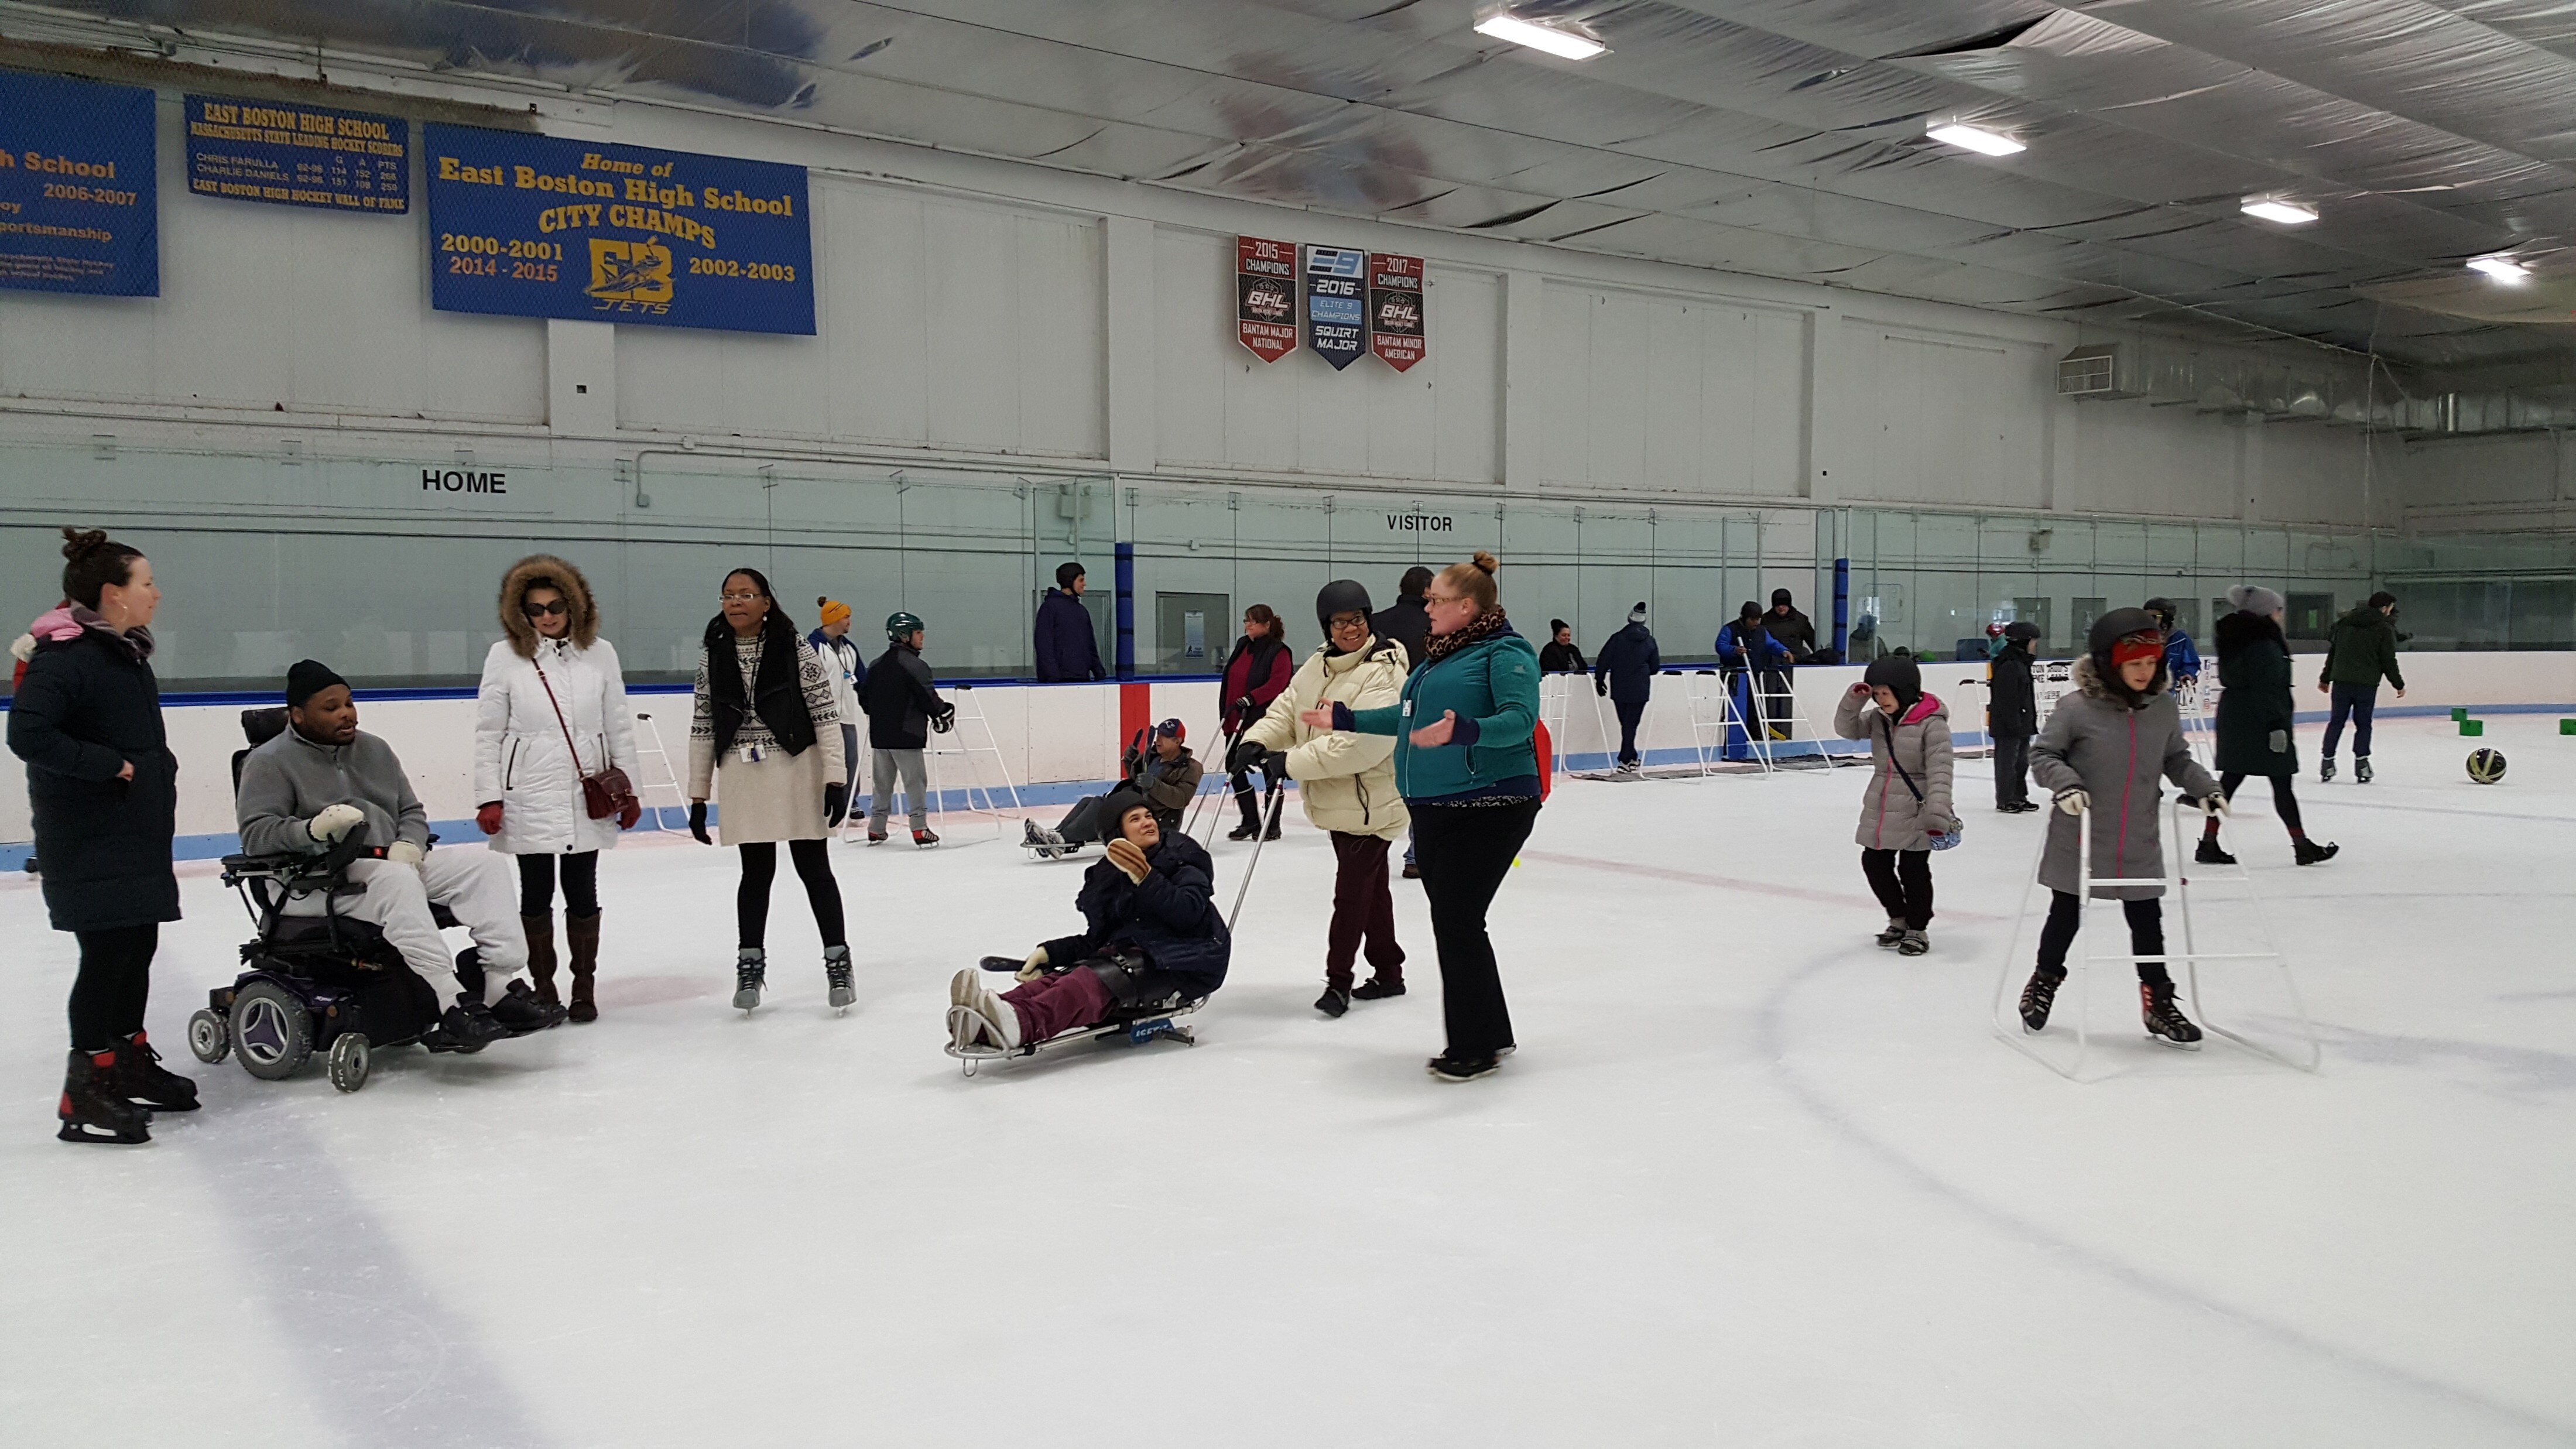 A large group of adults skating, walking and socializing in an ice skating rink wearing warm winter clothes. Some are on skating sleds, others using ice skates and walkers, some only using ice skates and one person is using a power wheelchair.